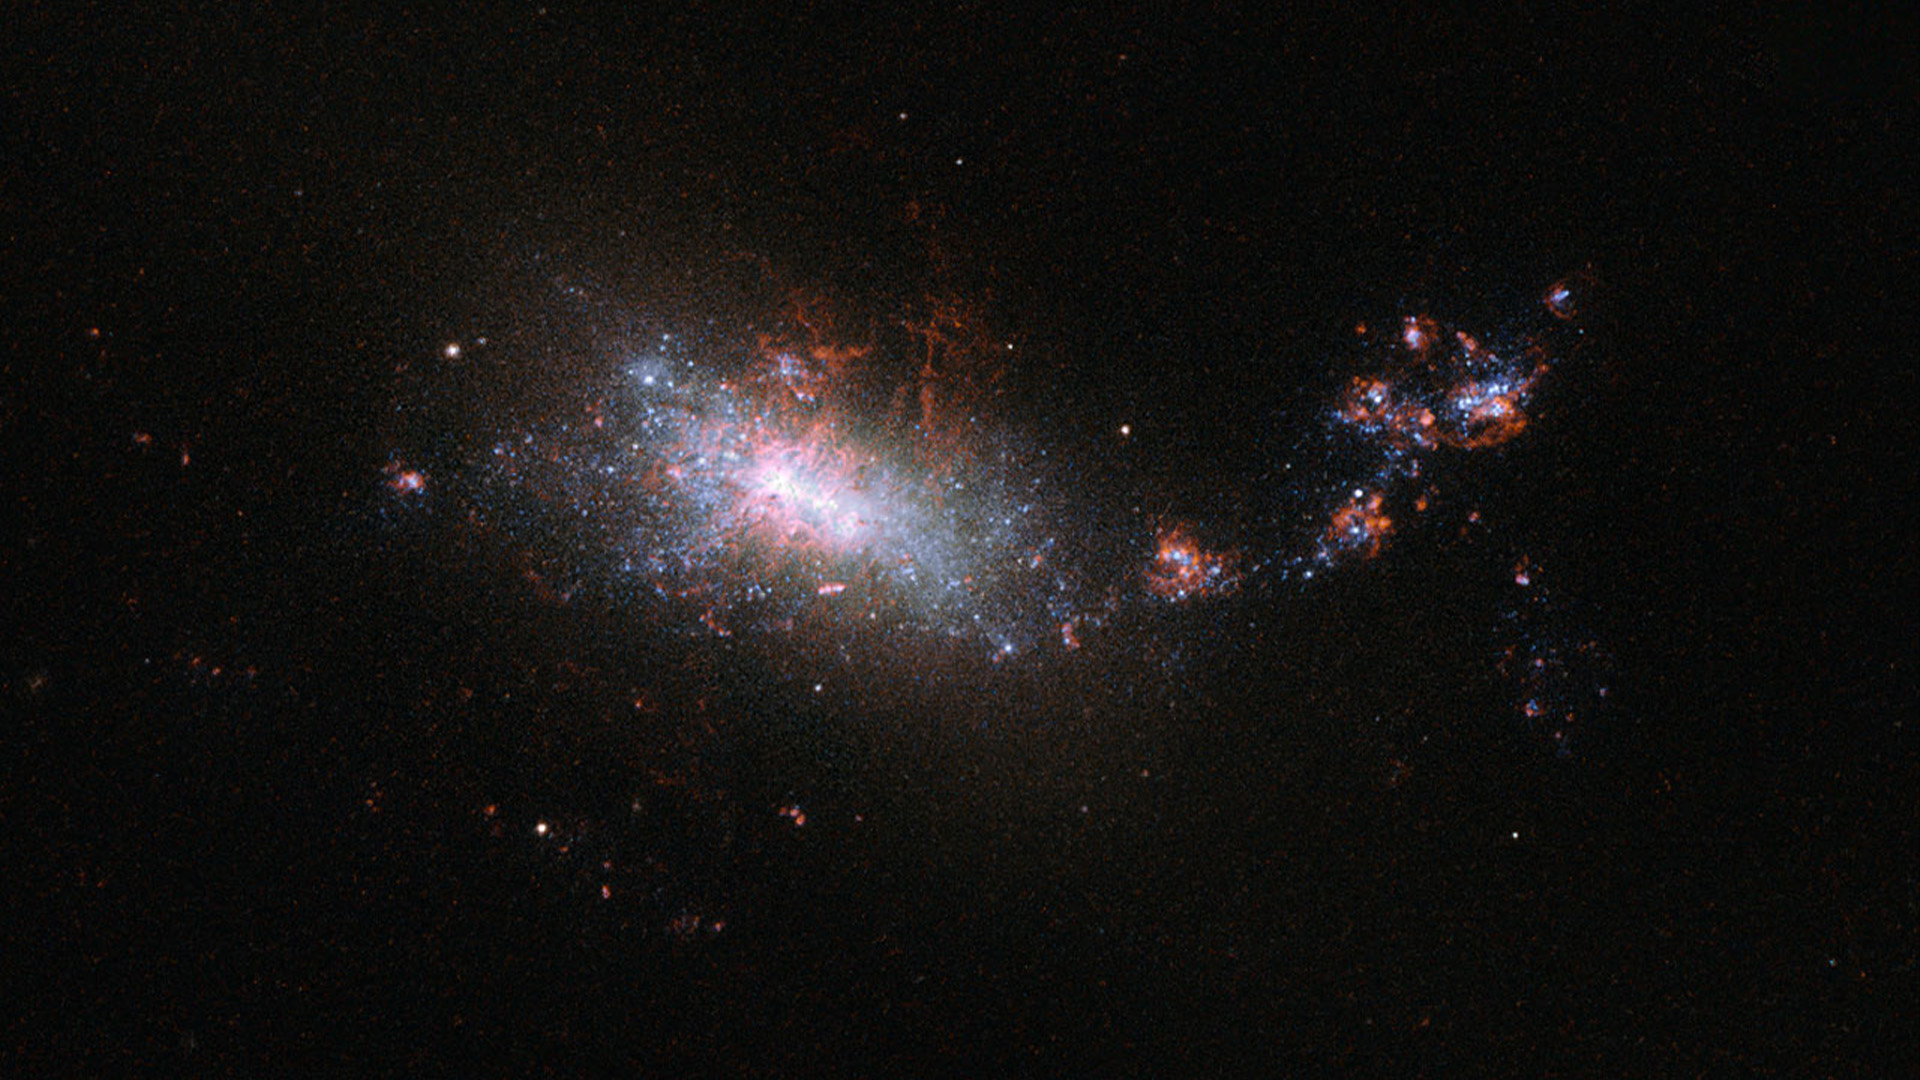 Faint dwarf galaxies like NGC 1140 are the best places to look for signs of missing stars.